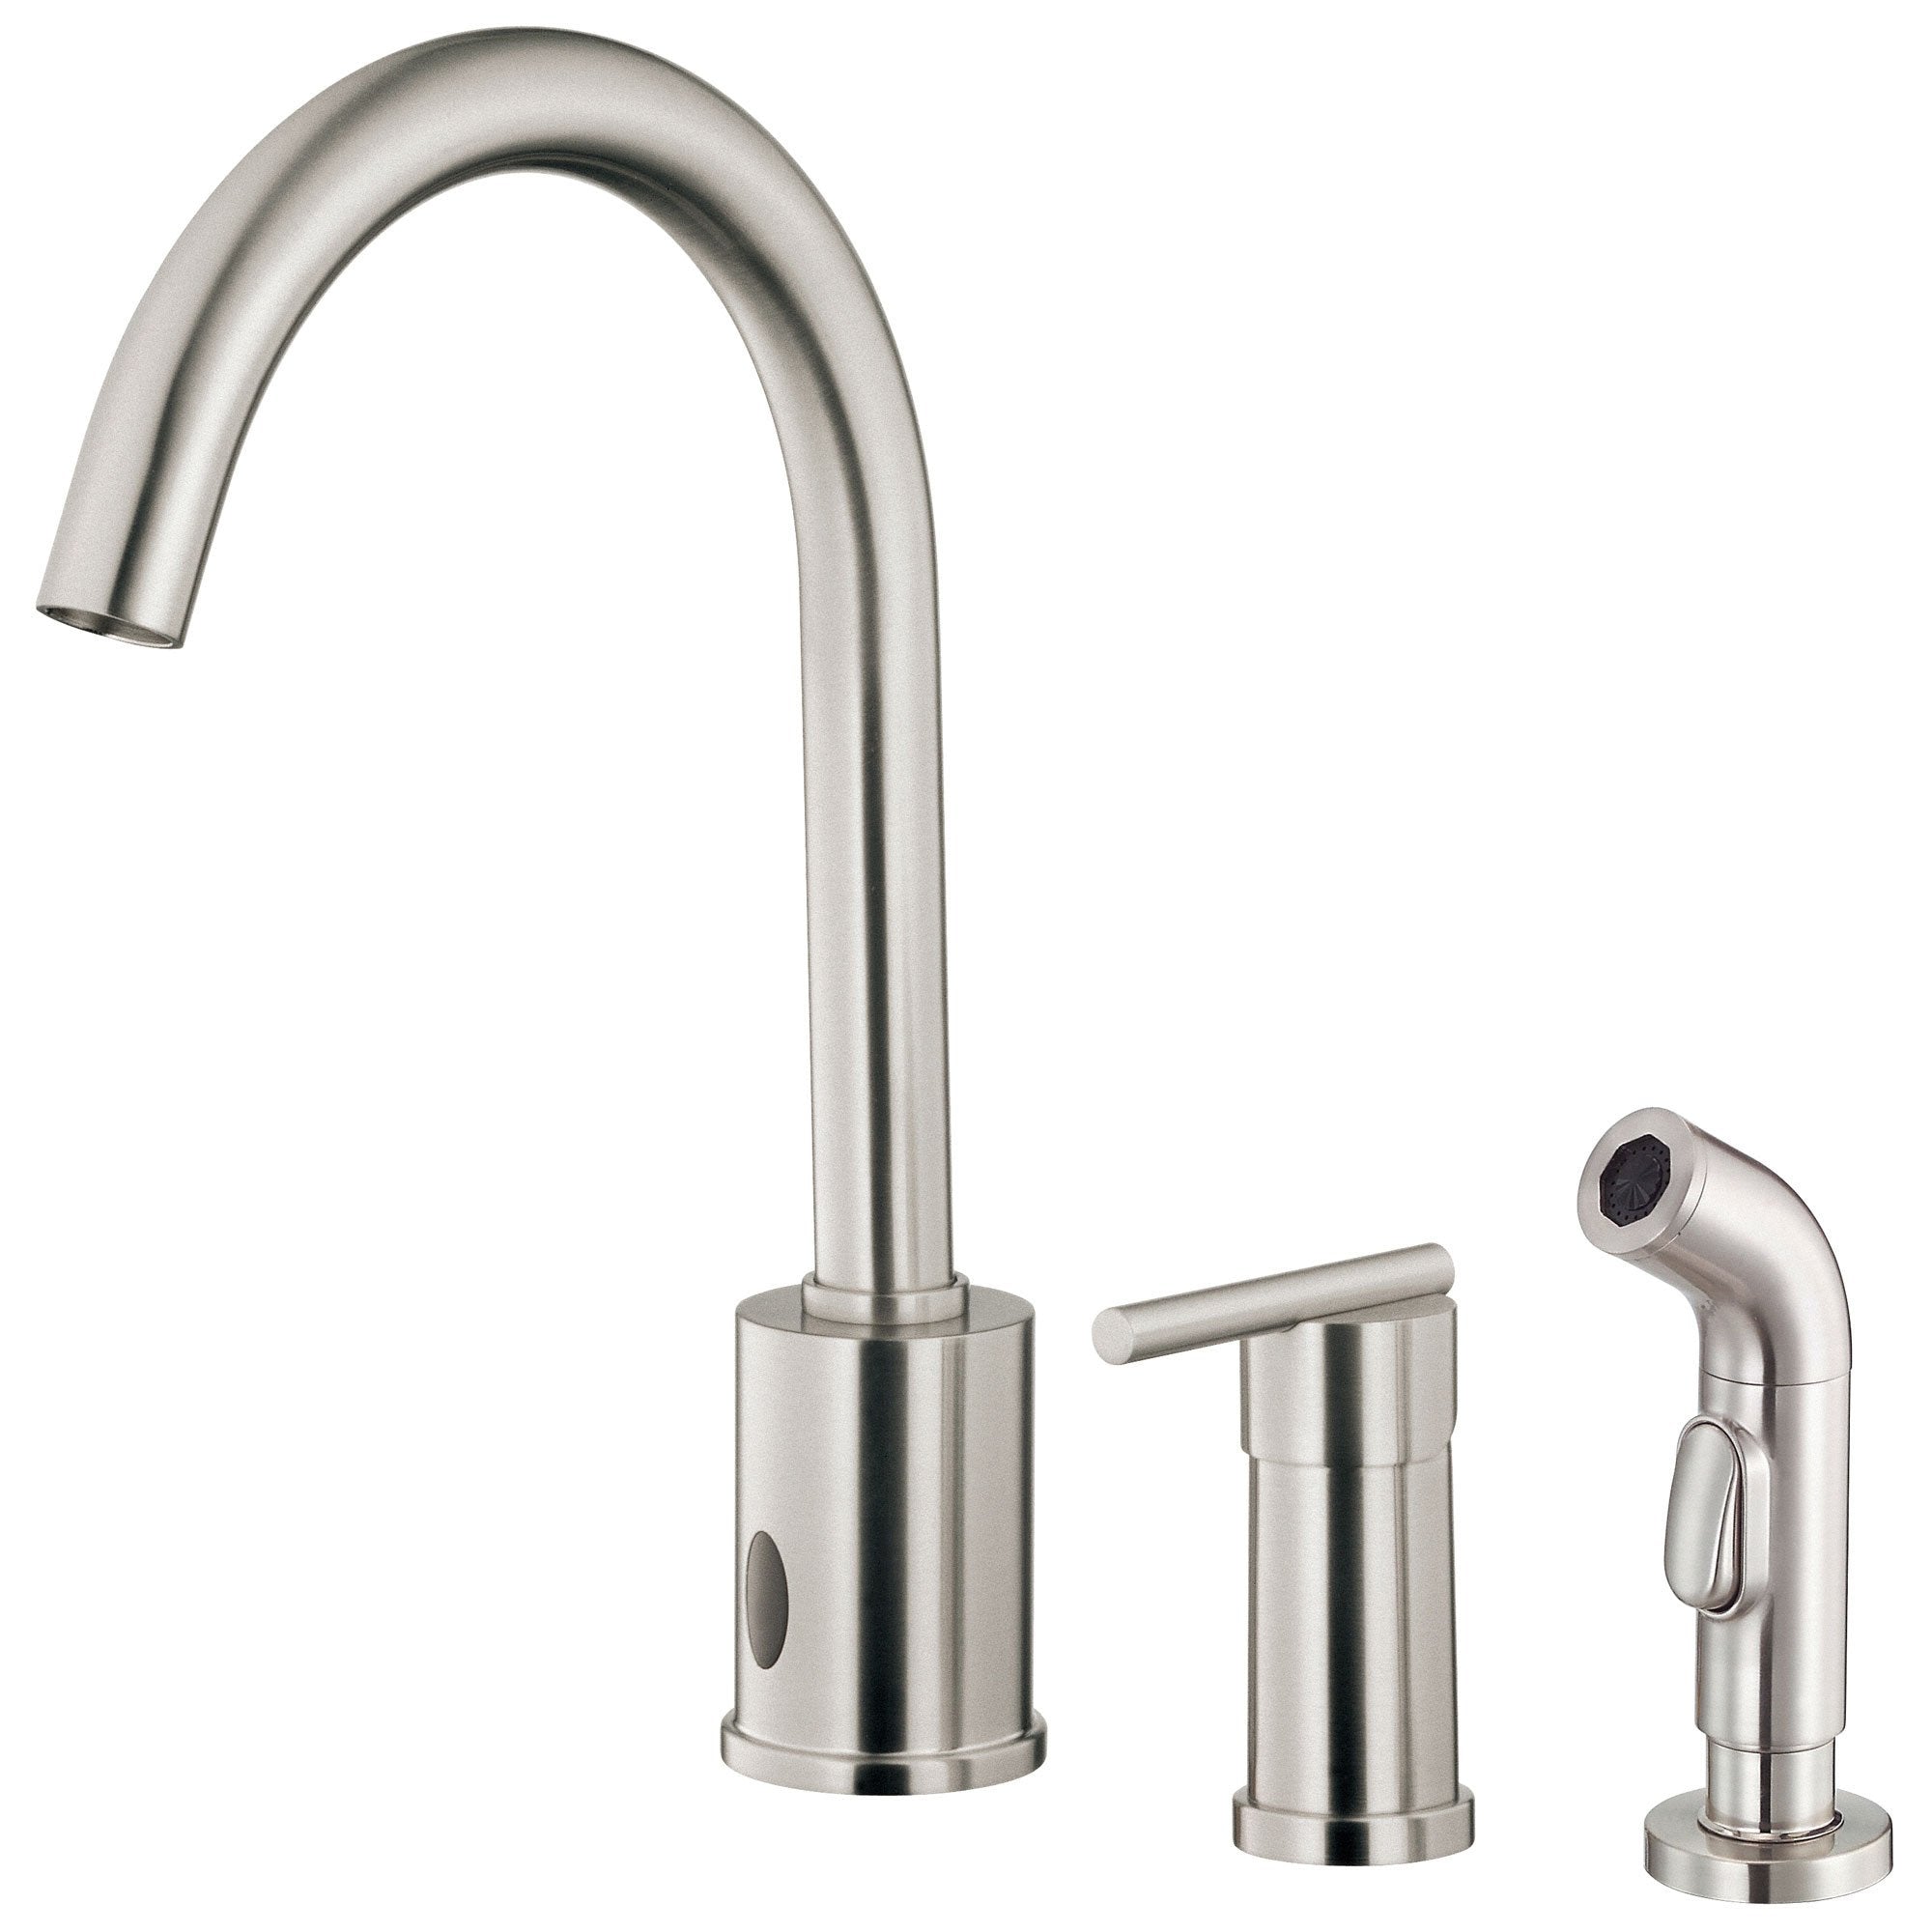 Danze Parma Stainless Steel Electronic Eye 1 Handle Kitchen Faucet with Sprayer